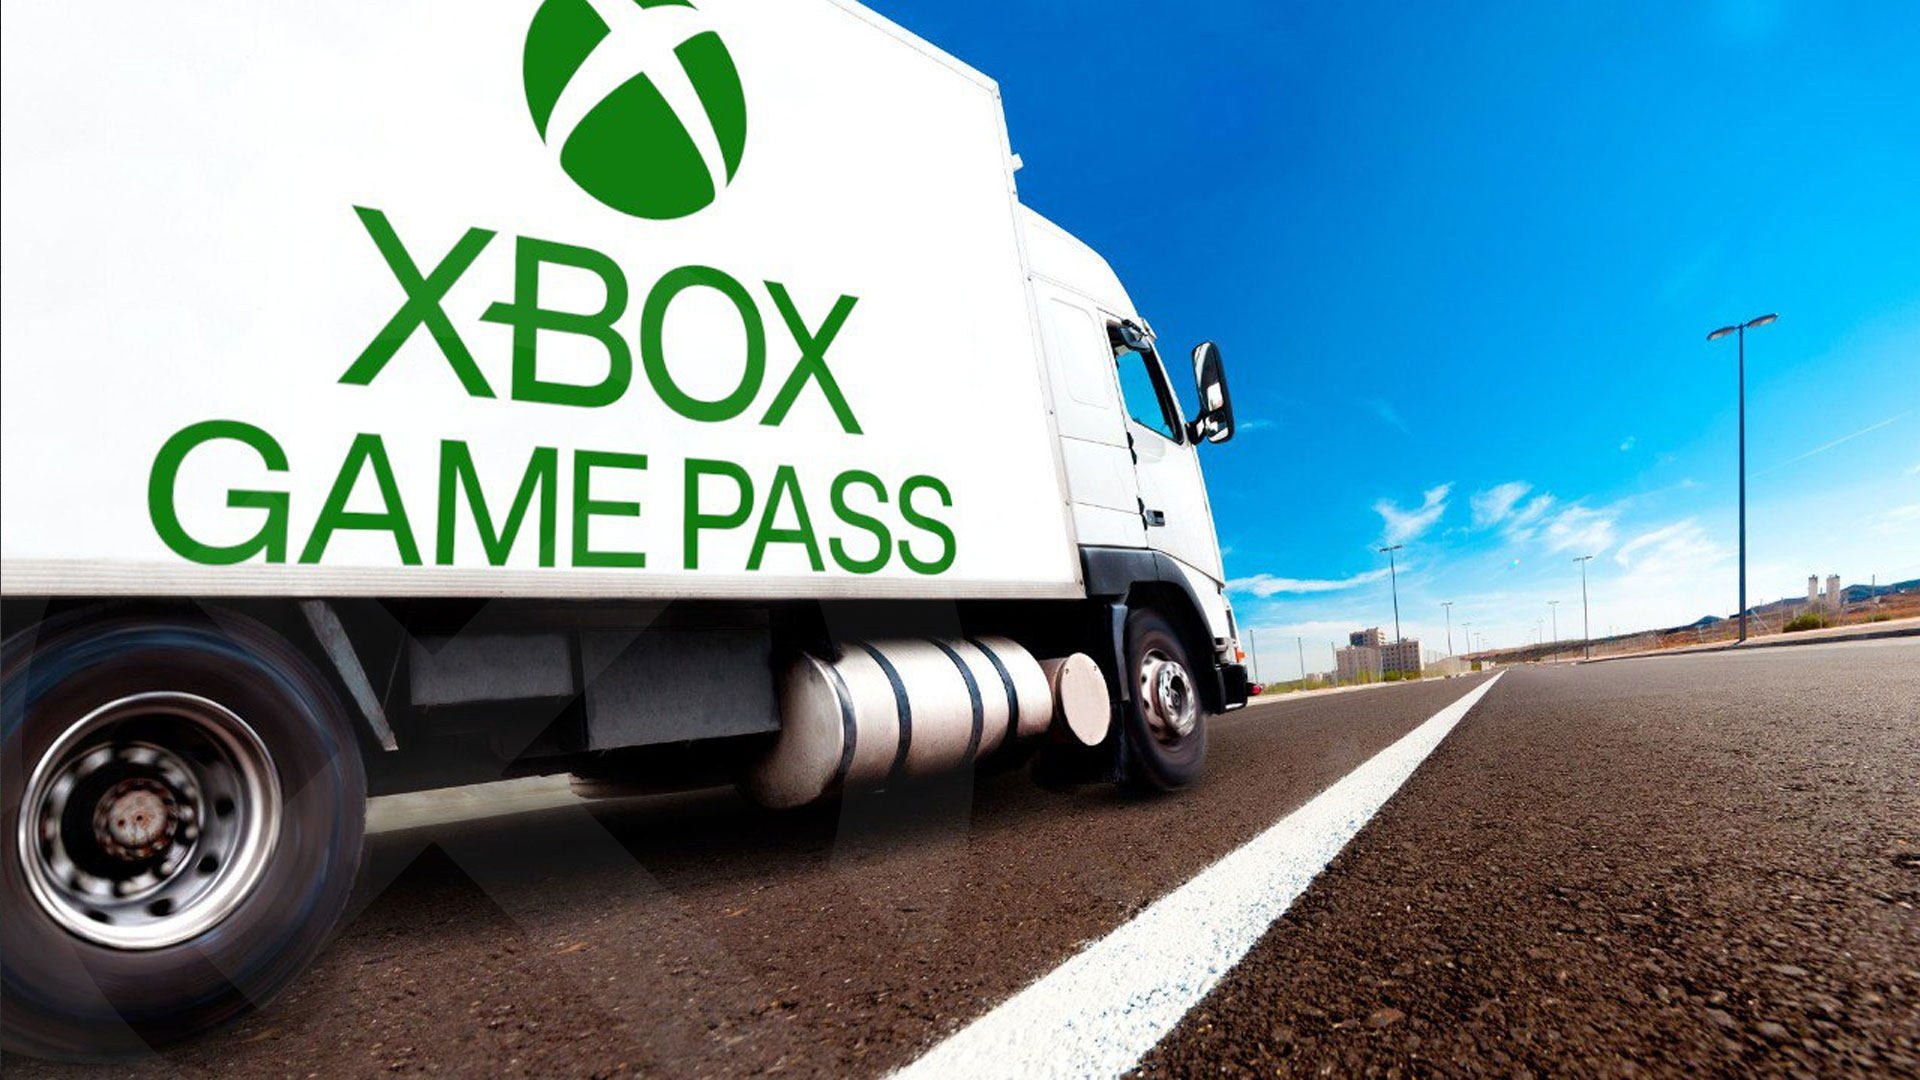 April comes loaded with releases for Xbox Game Pass